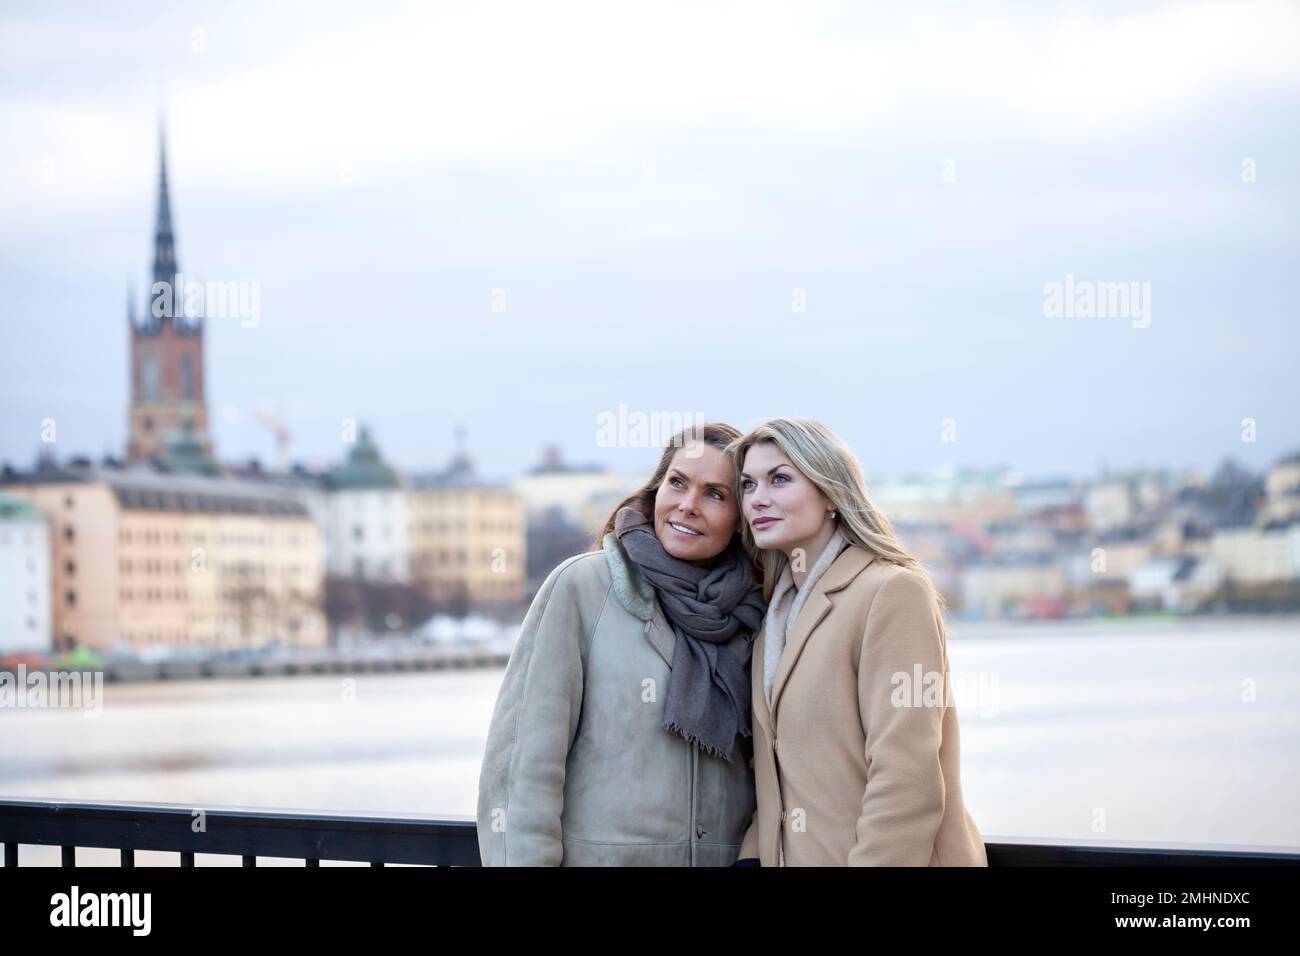 Mother with adult daughter in urban setting Stock Photo